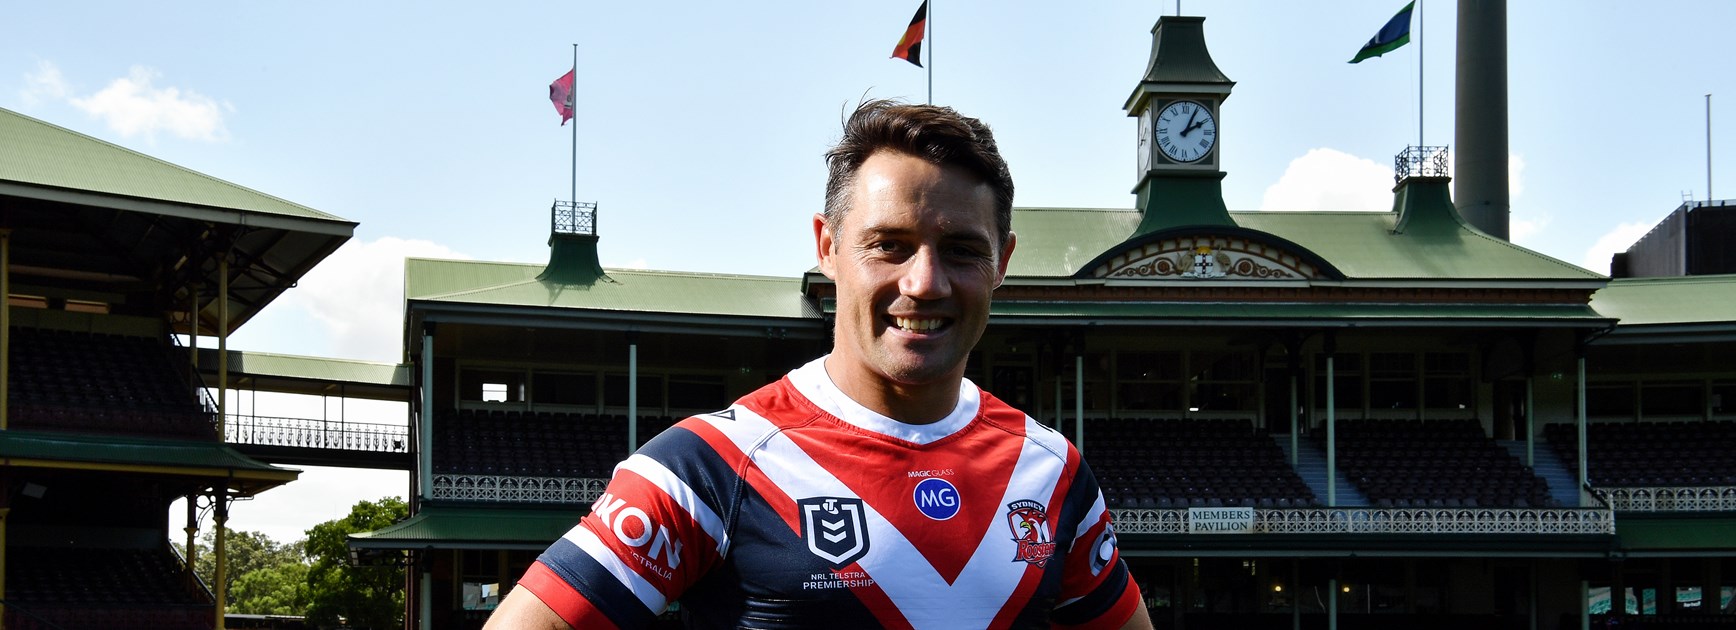 Cronk: Half my job's mentoring next generation of Roosters playmakers